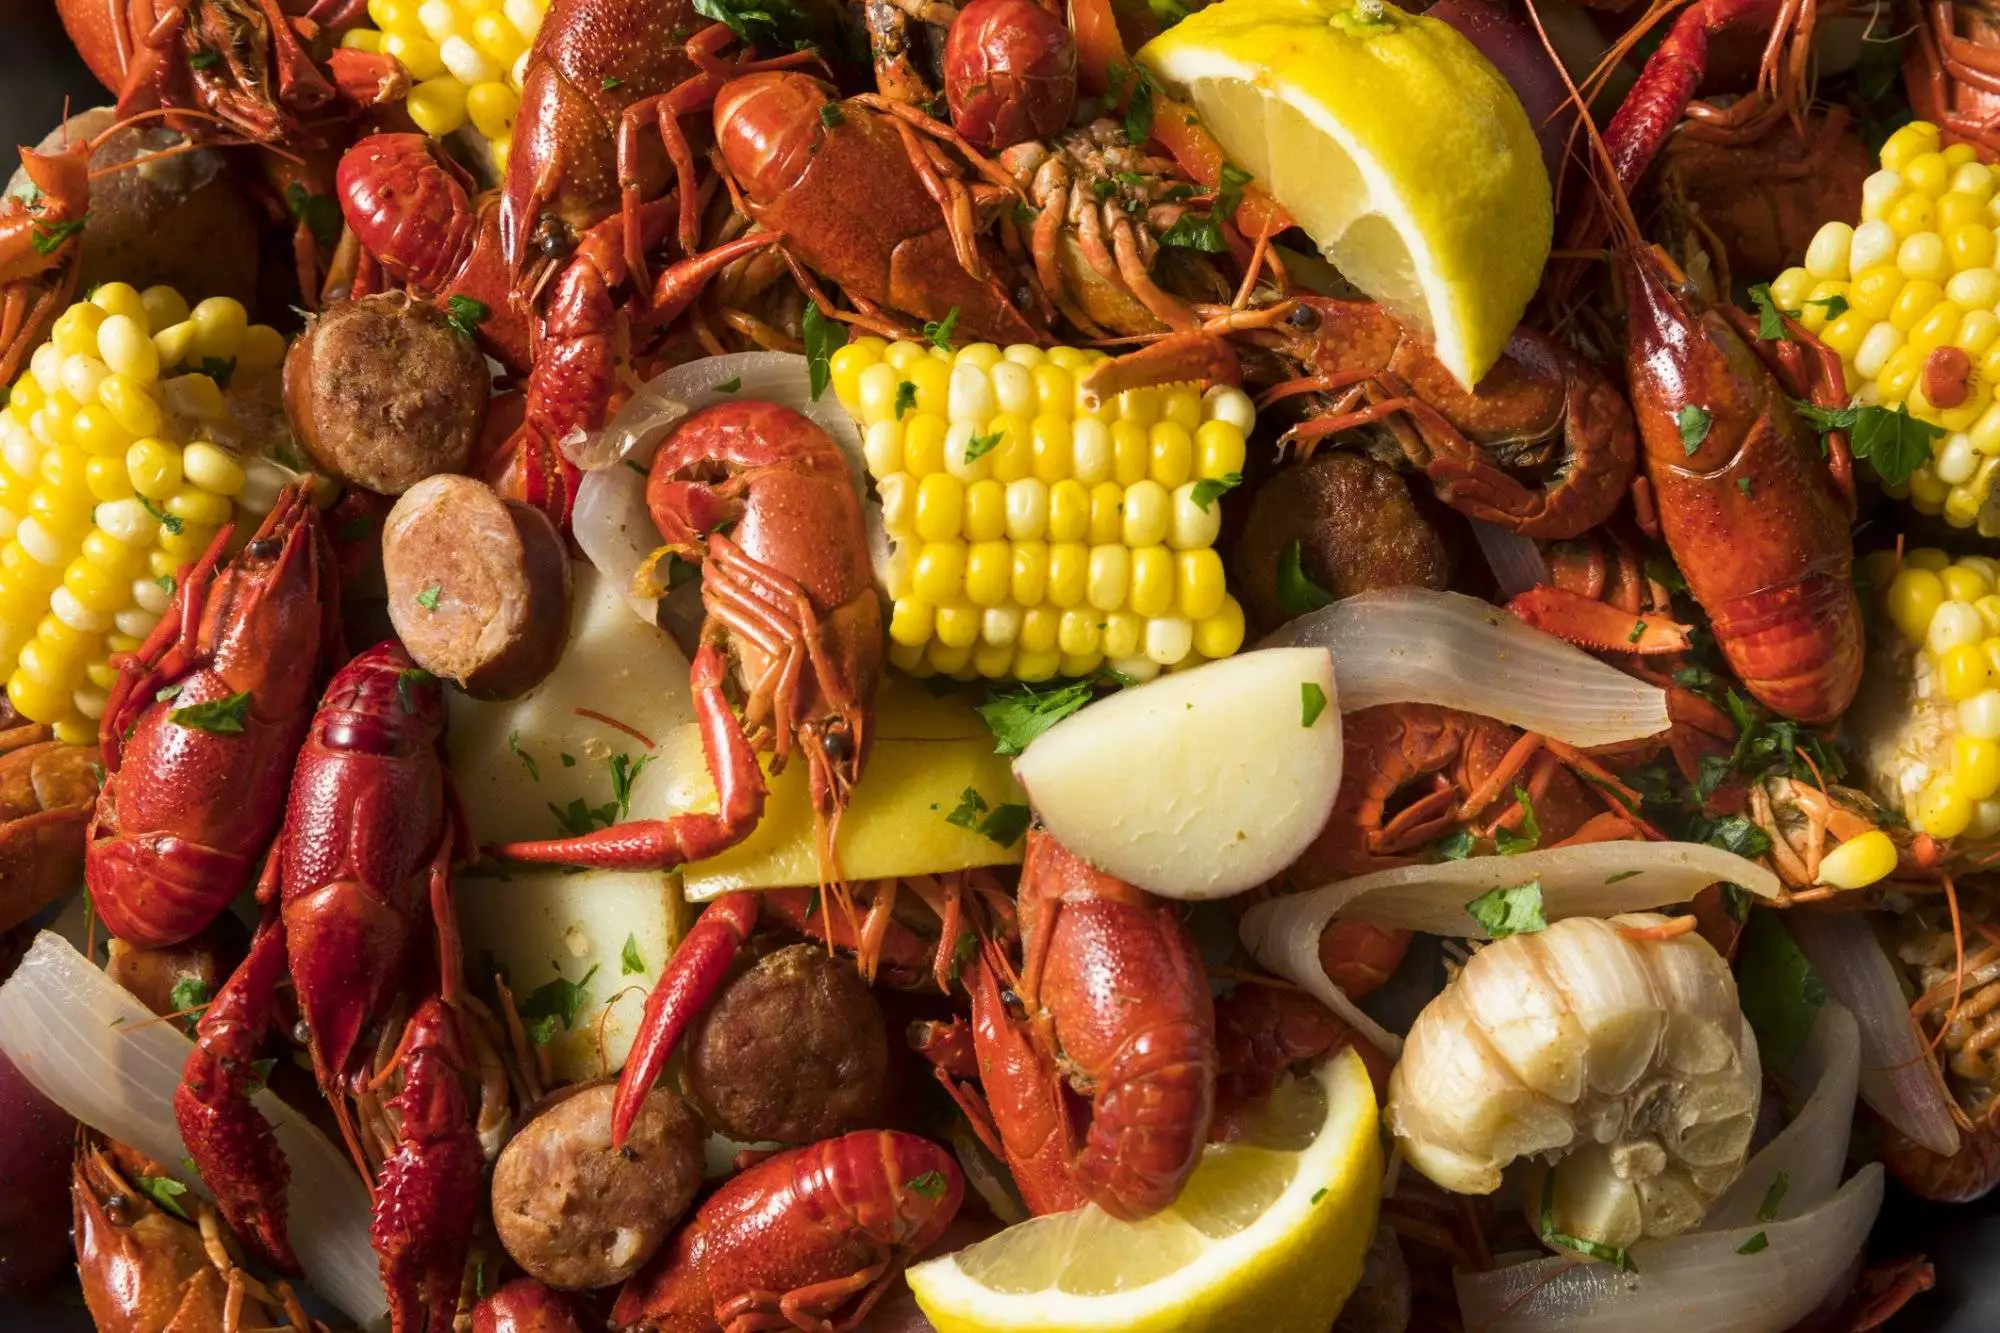 Indulge in Fine Dining at this Seafood Restaurant in Richardson